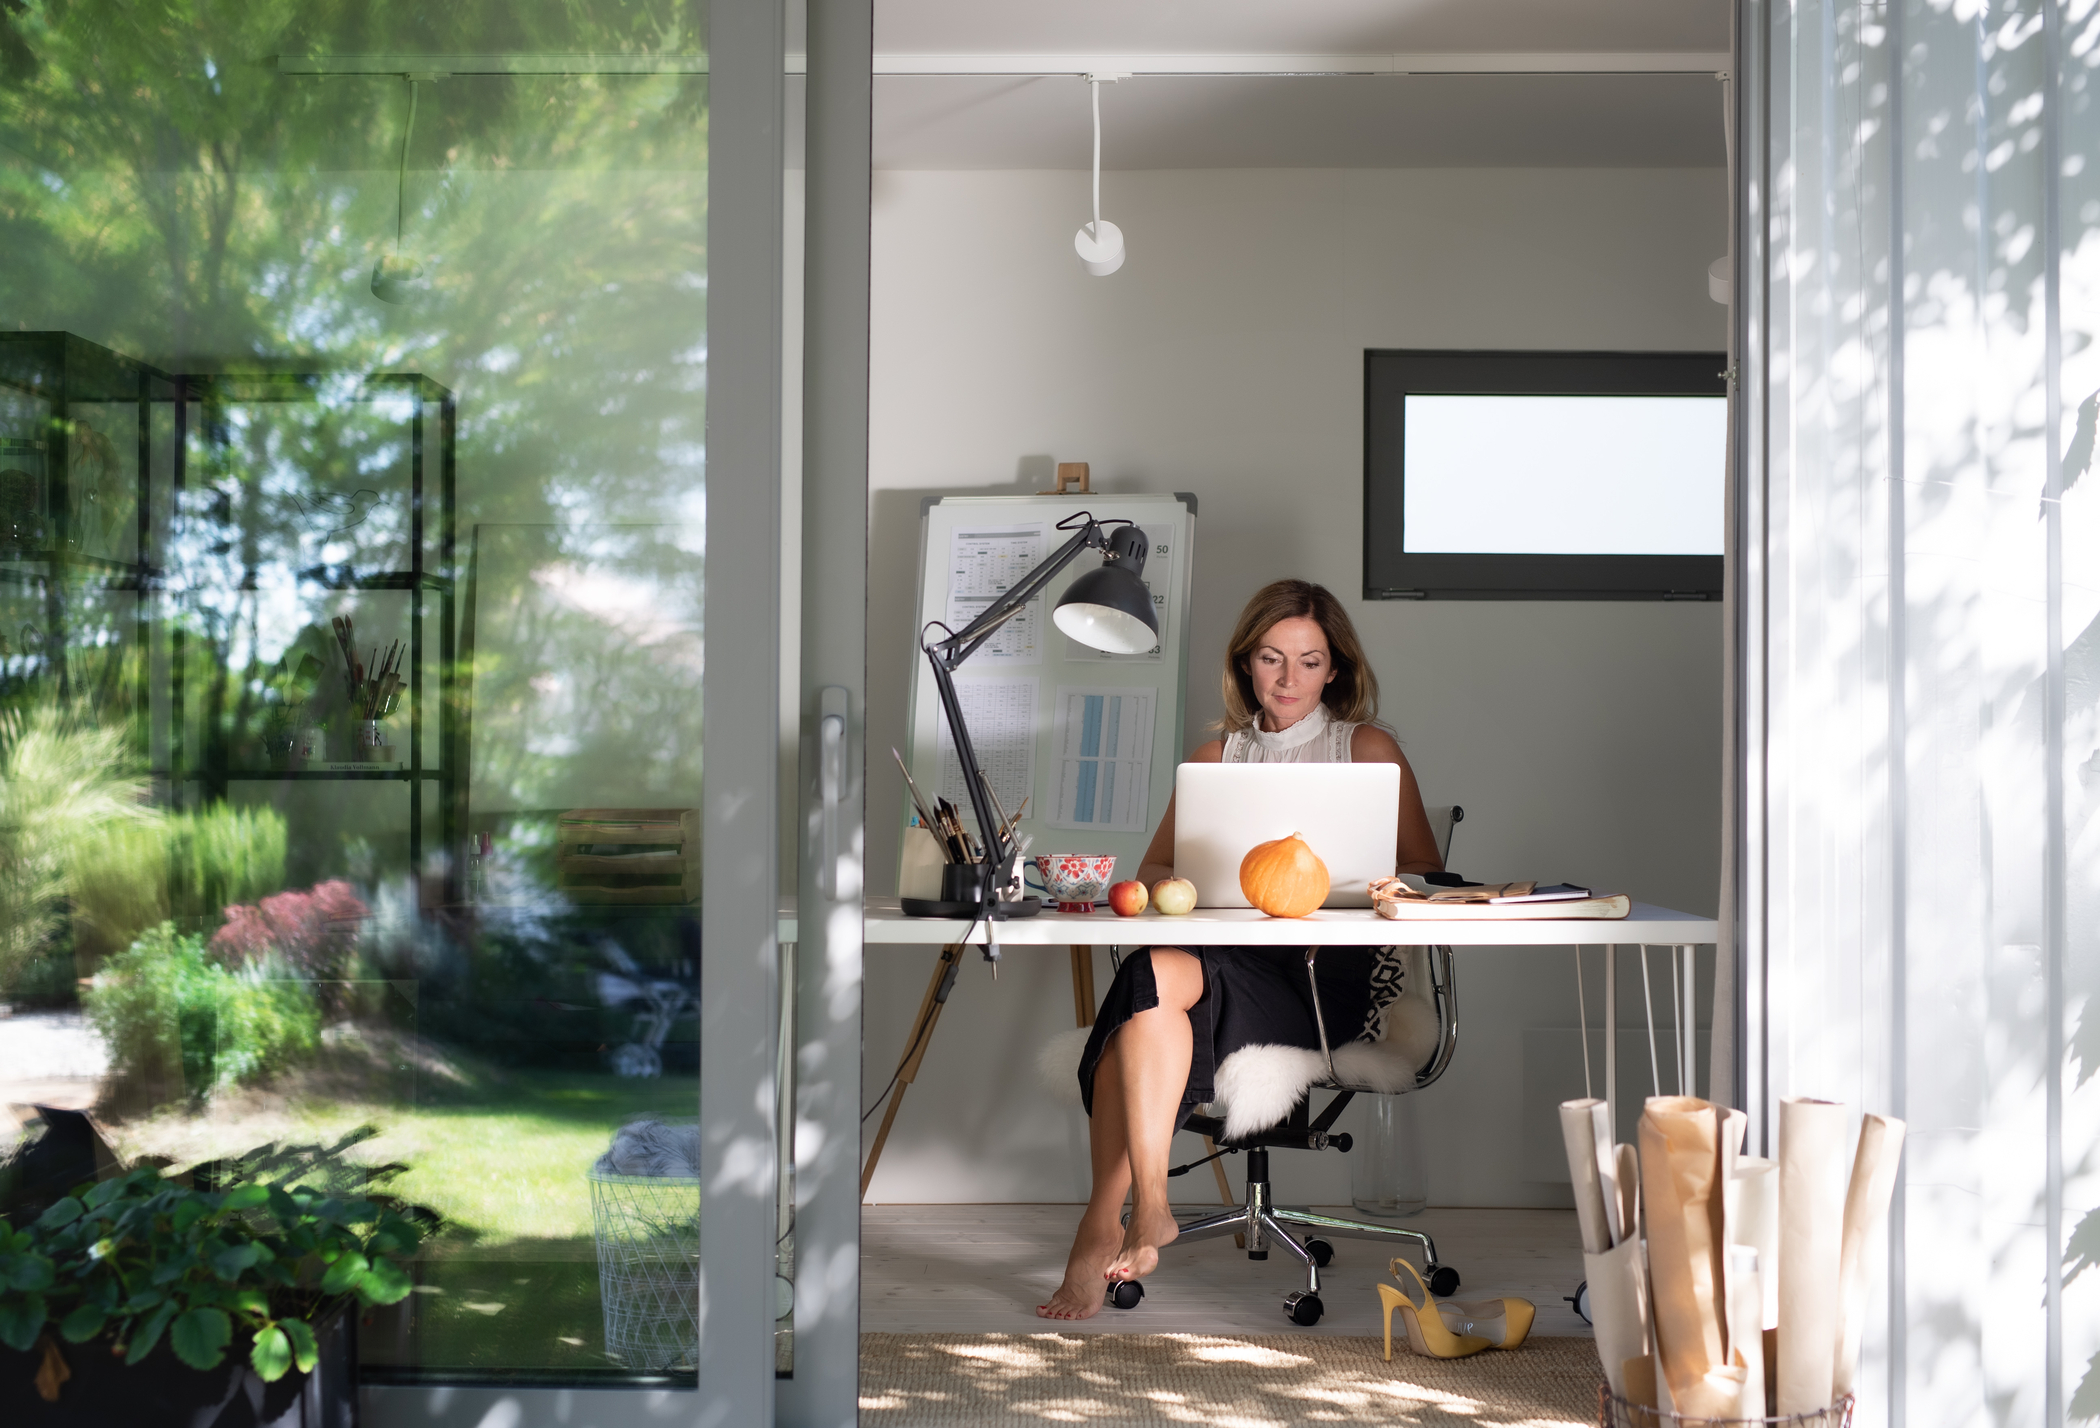 How to take advantage of remote working for recruitment